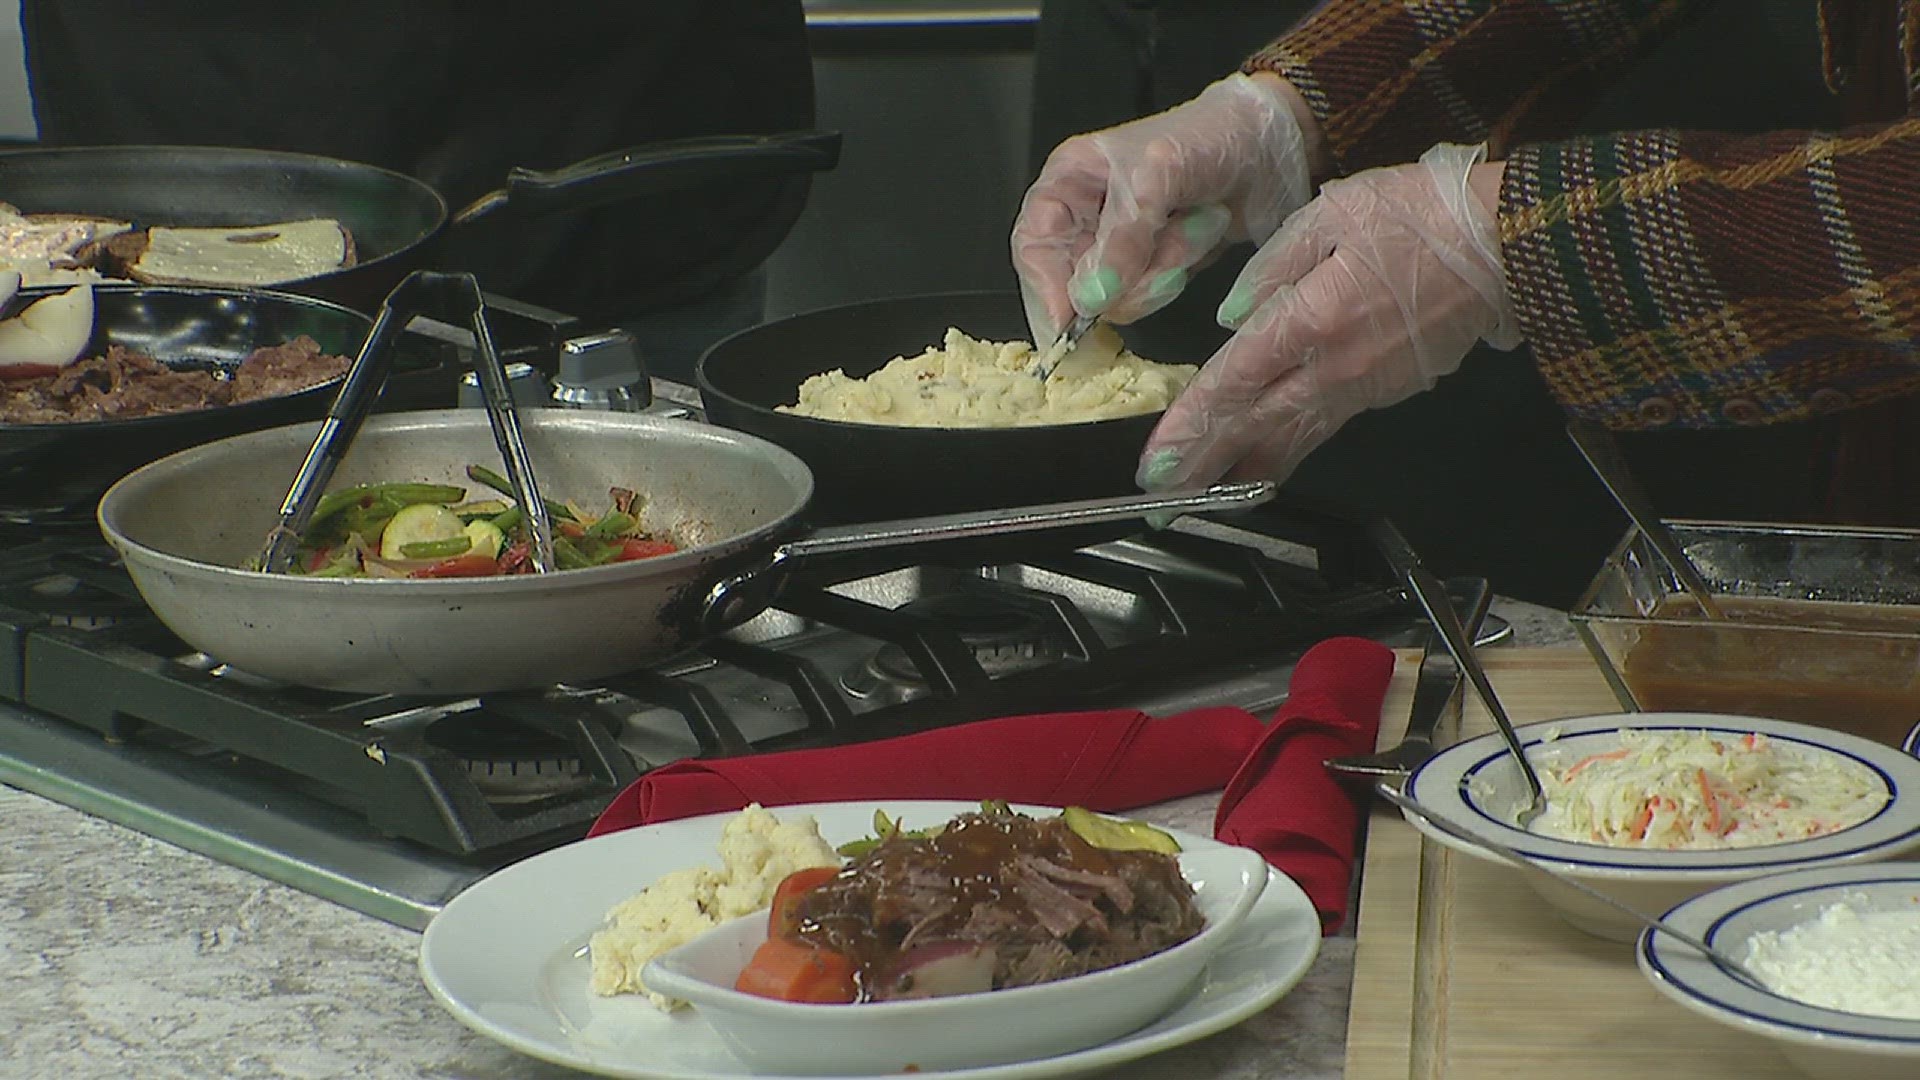 Jeff Grunder said the pot roast has been one of the most popular entrées since the Machine Shed opened. He also made a smoked turkey Rueben with coleslaw.